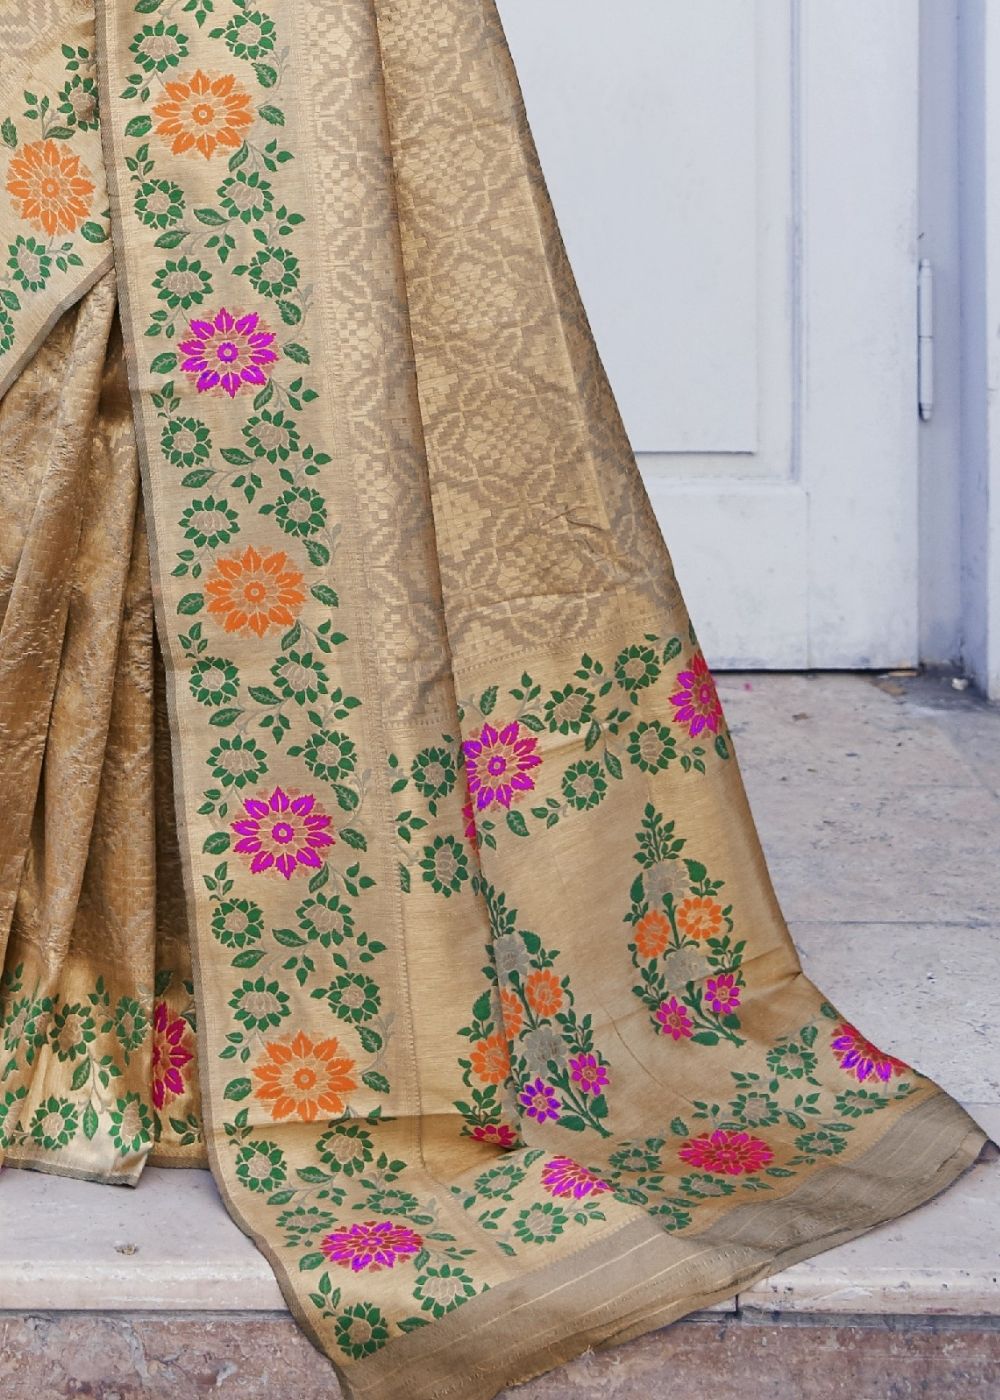 Cedar Brown and Golden Blend Silk Saree with Floral Woven Border and Pallu